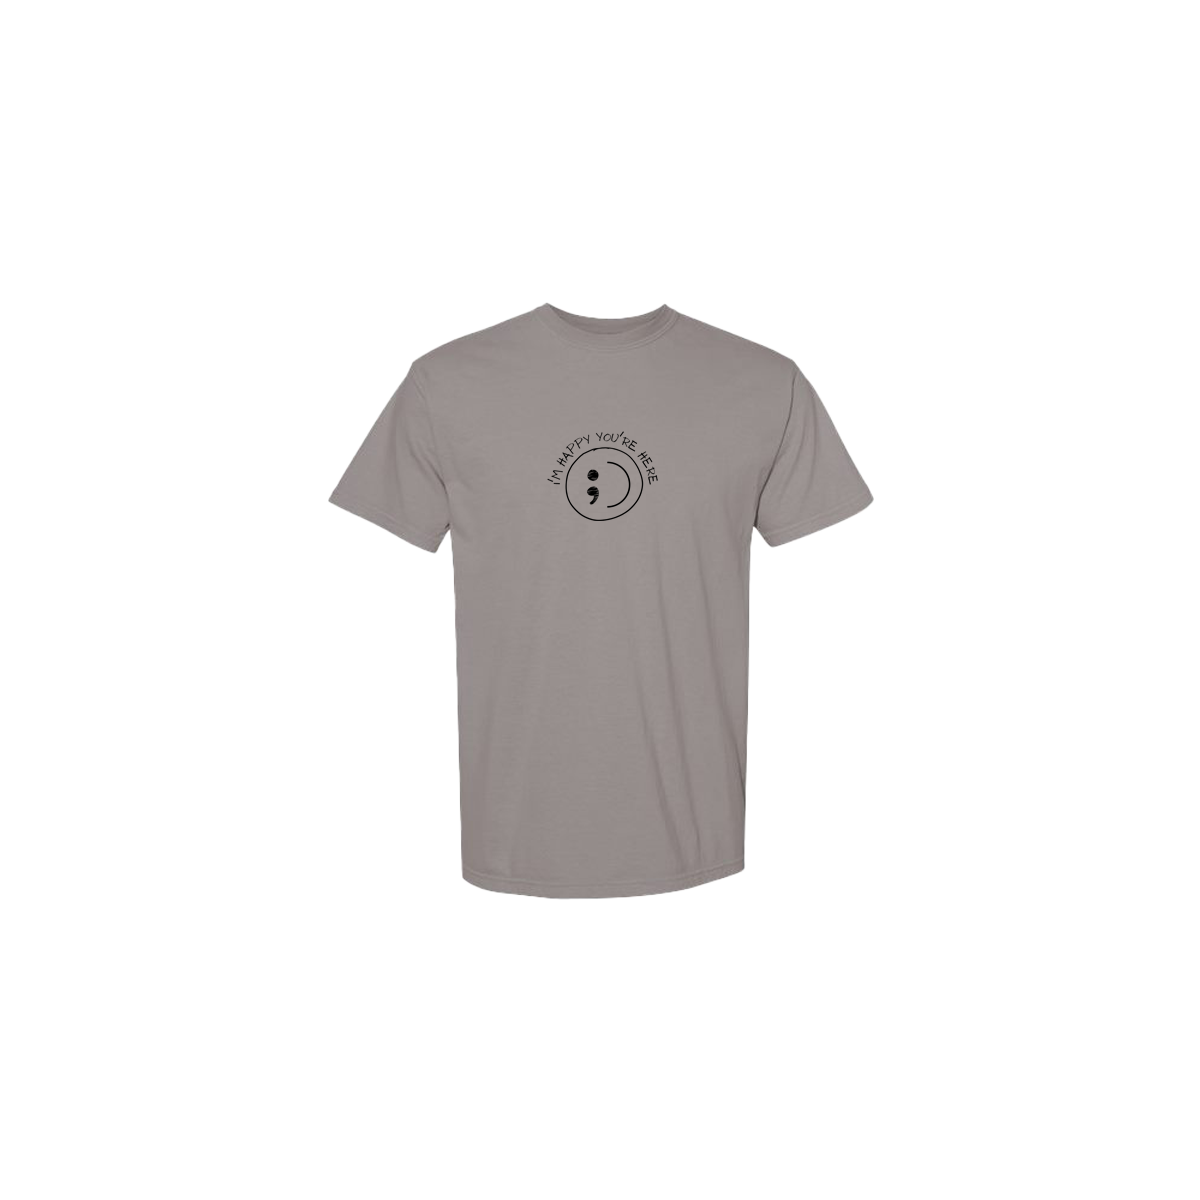 I'm Happy You're Here Embroidered Grey Tshirt - Mental Health Awareness Clothing